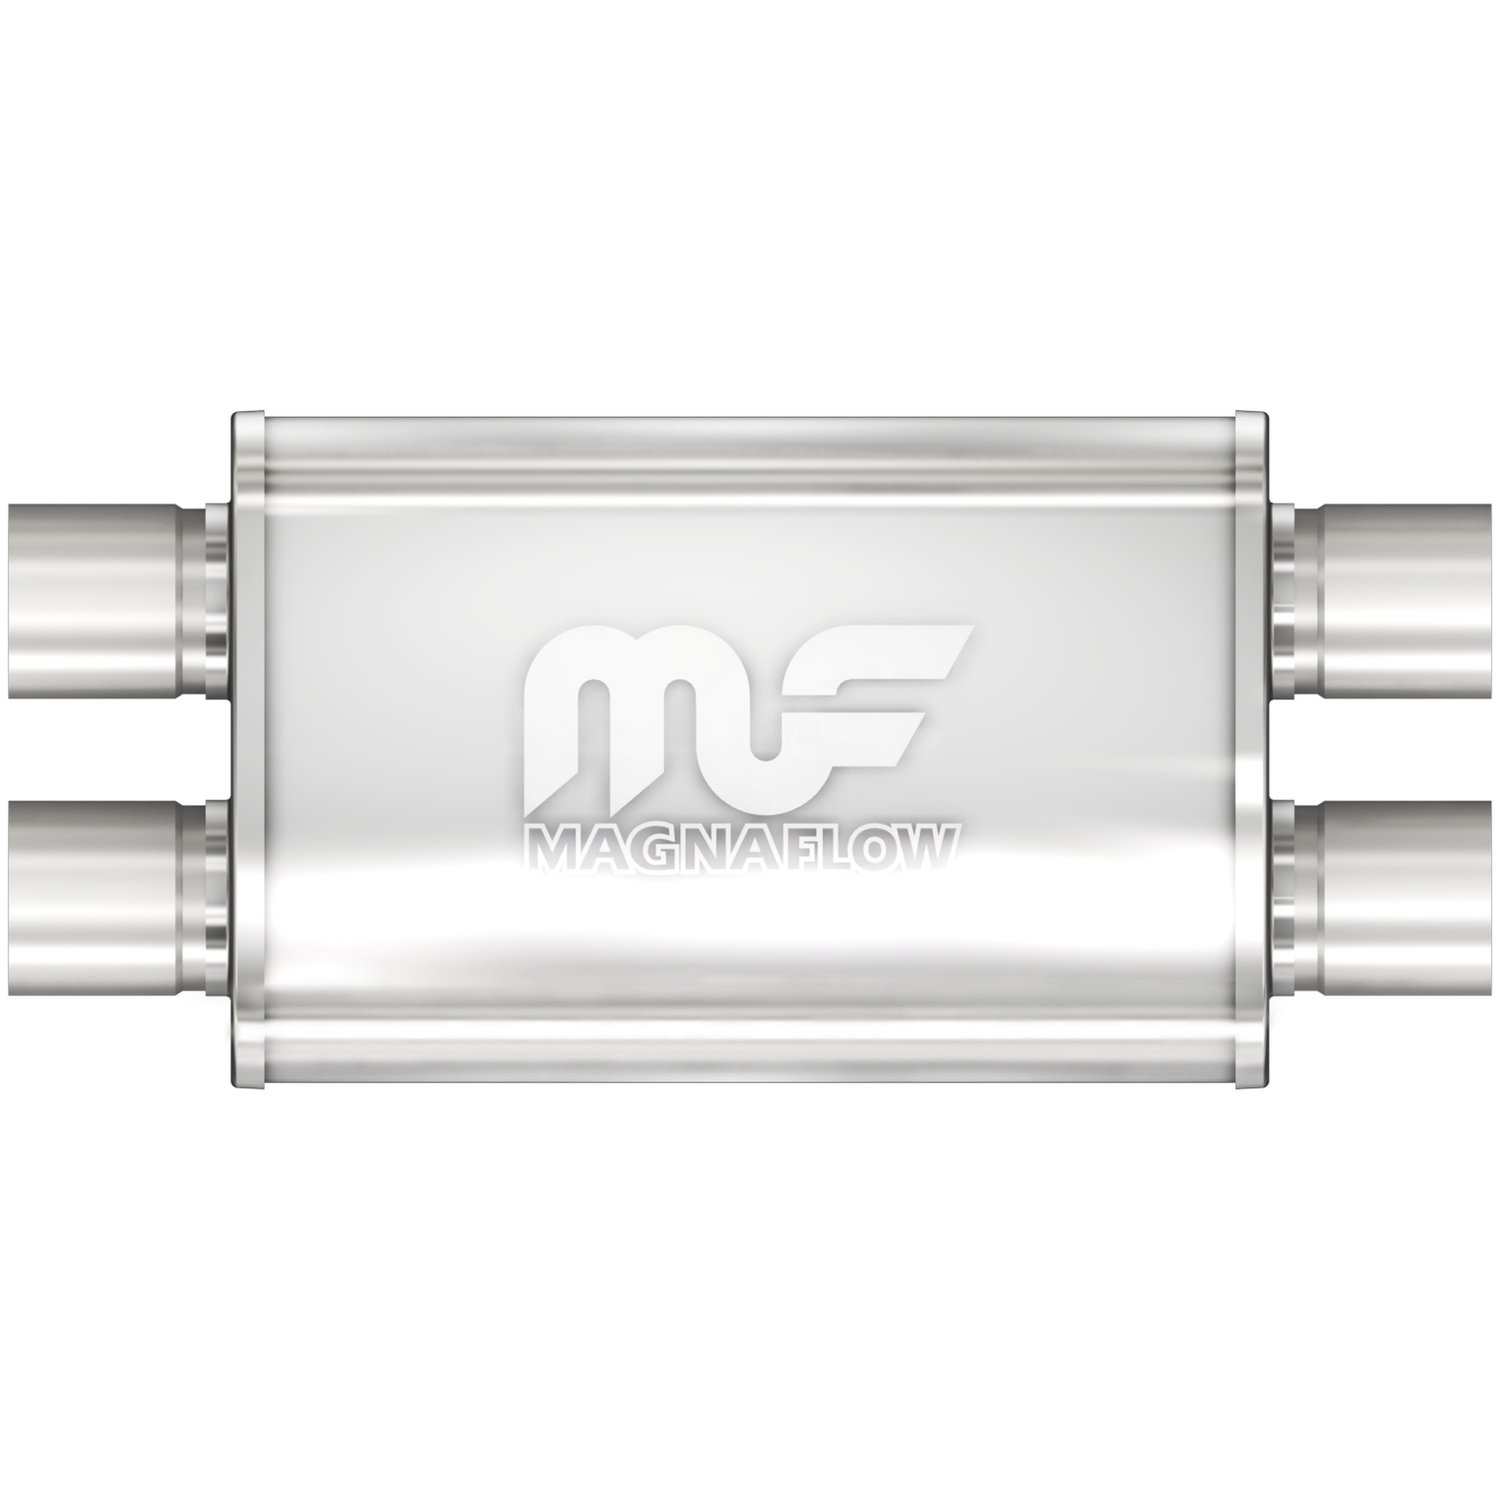 4" x 9" Oval Muffler Dual In/Dual Out: 2.5" Body Length: 14" Overall Length: 20" Core Size: 2.5" Satin Finish